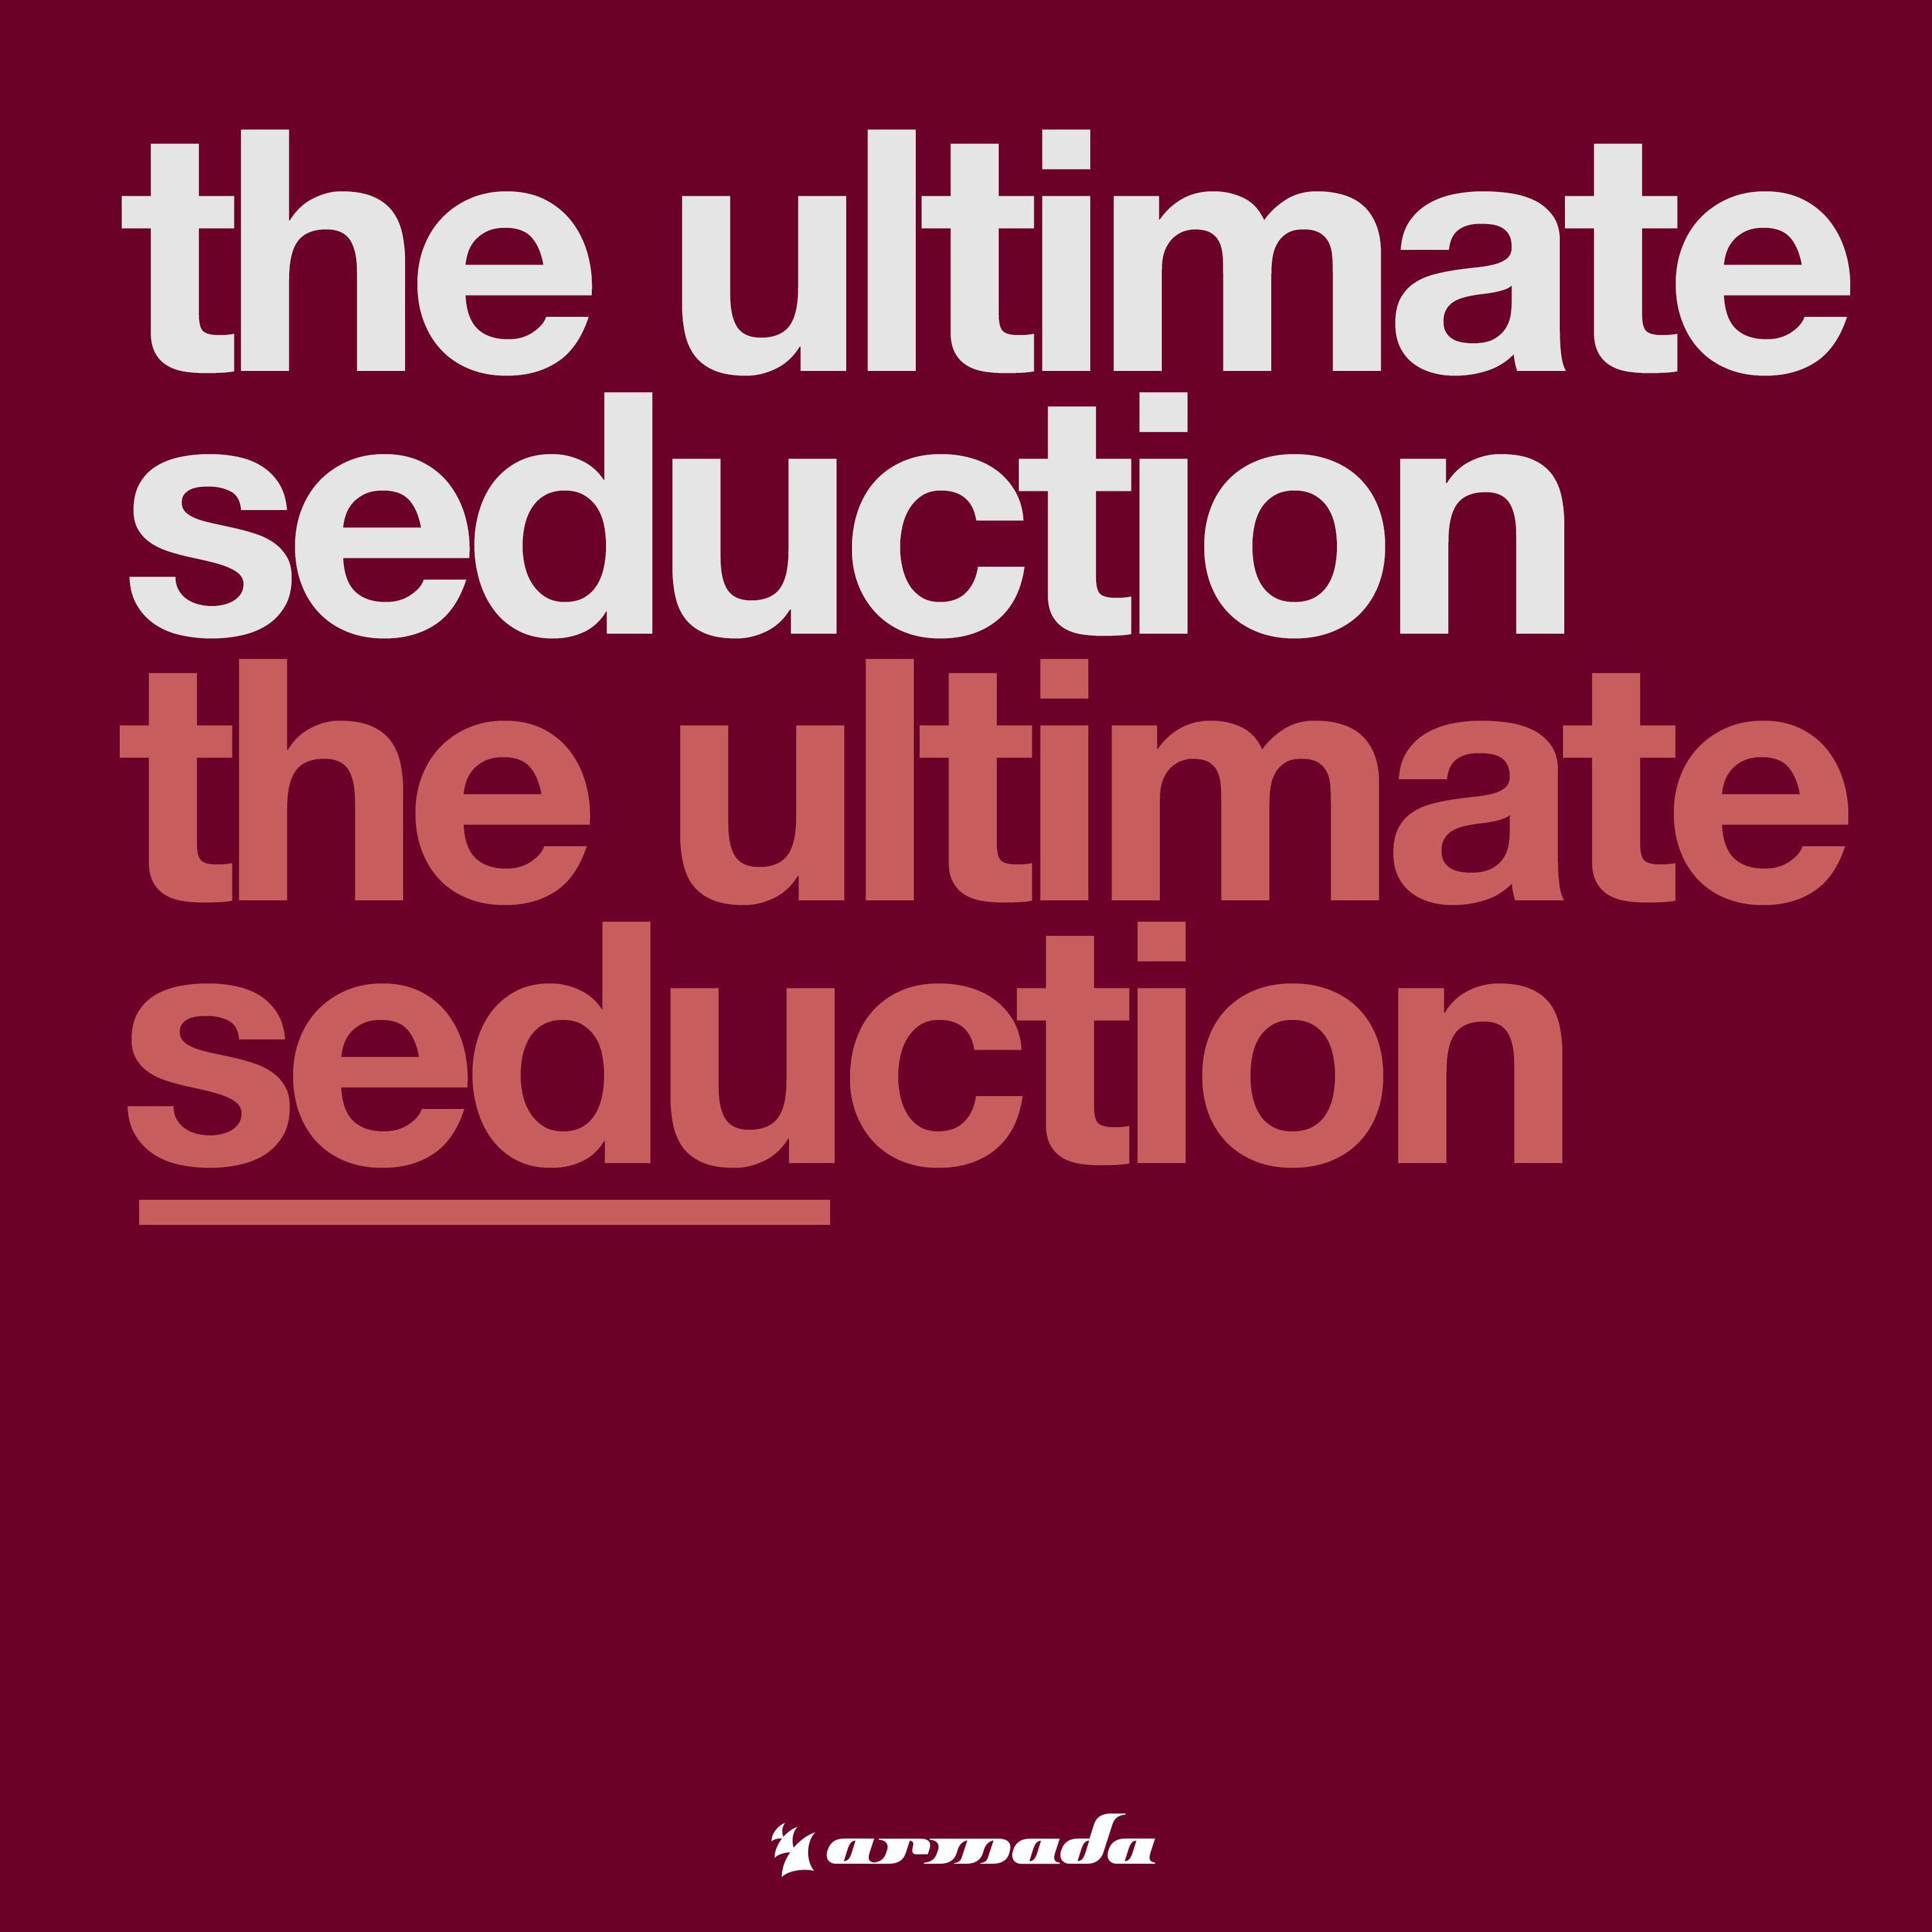 The Ultimate Seduction (The Shrink Remix)